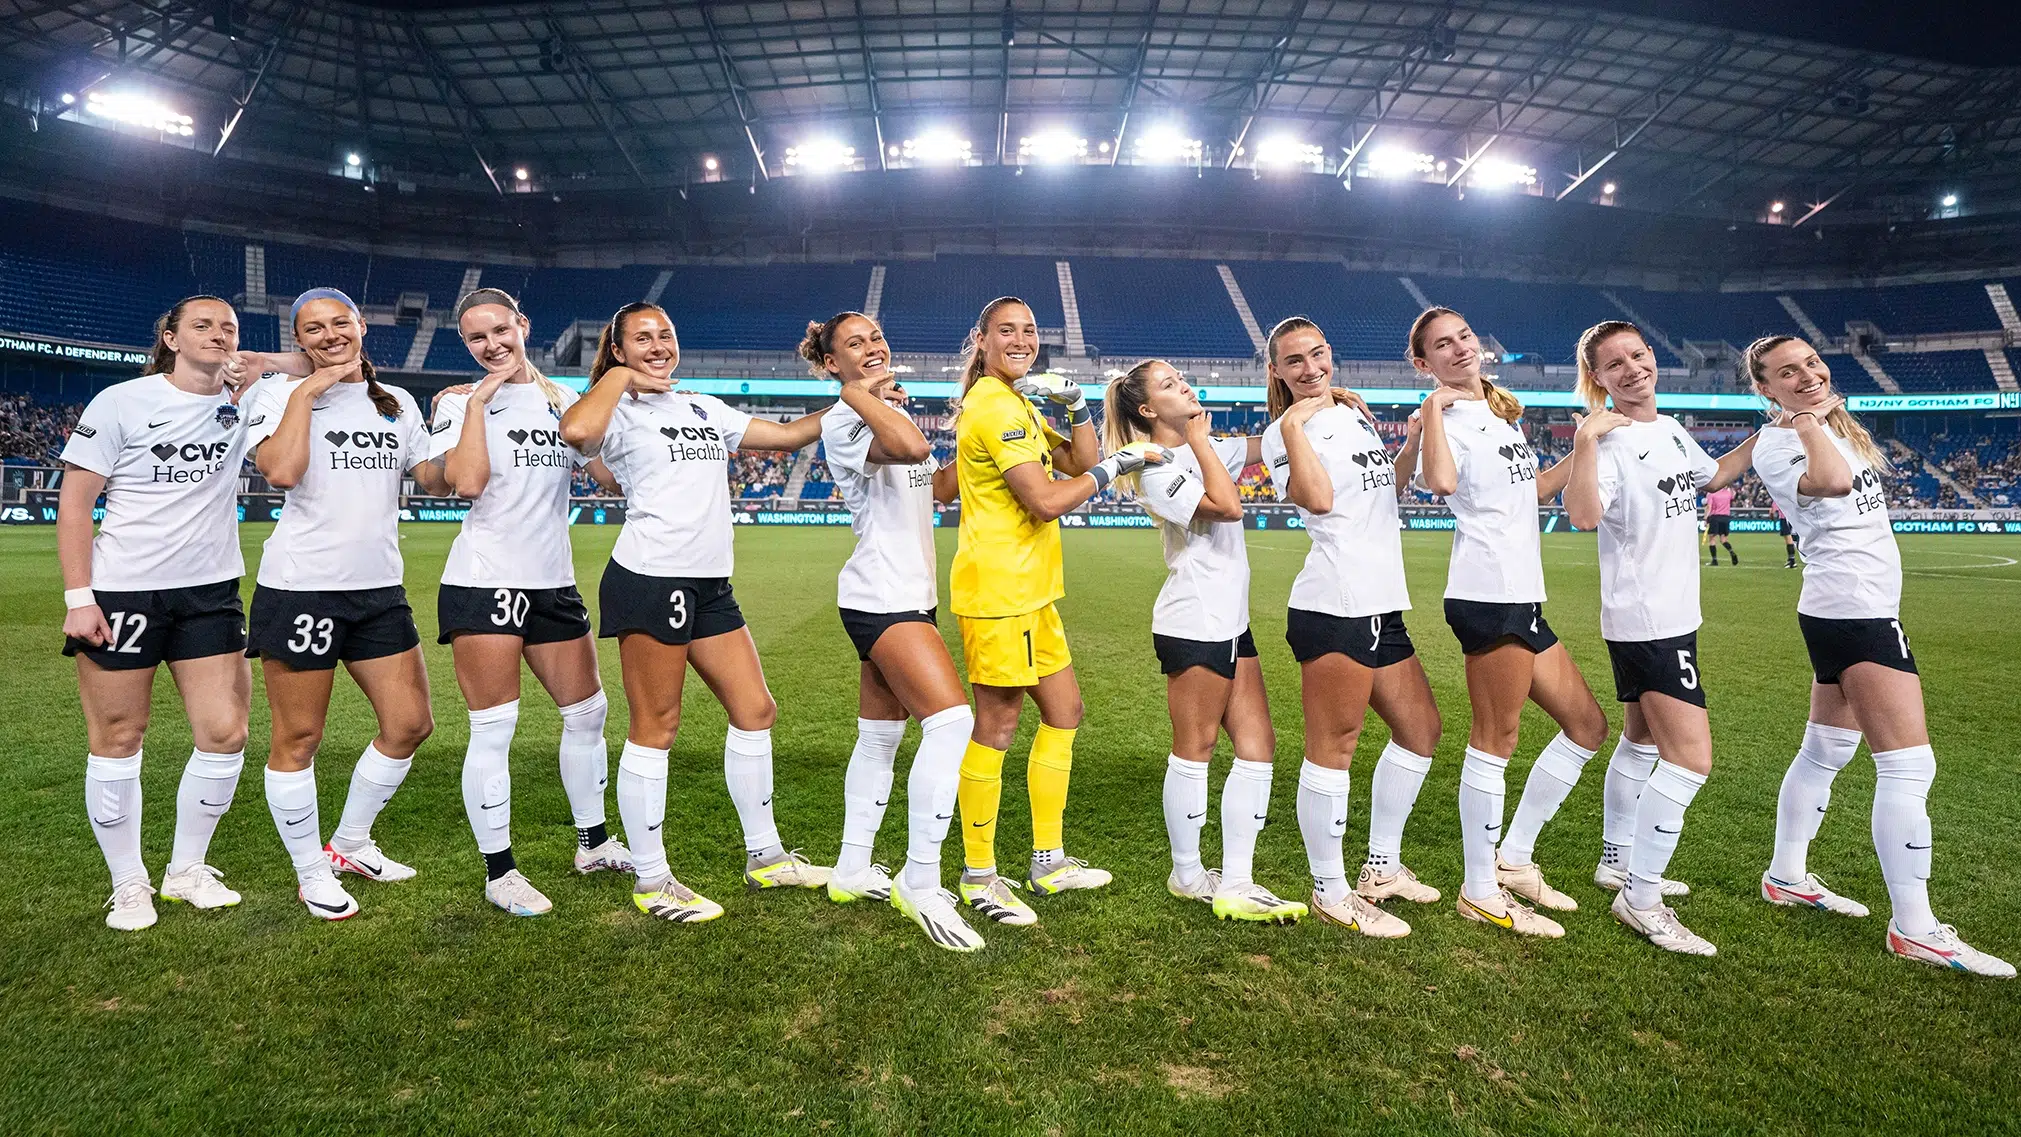 The starting eleven of the Washington Spirit pose with their hands under their chins. The team is wearing white tops, black shorts and white socks. Aubrey Kingsbury is in the middle wearing a yellow goalkeeper jersey.